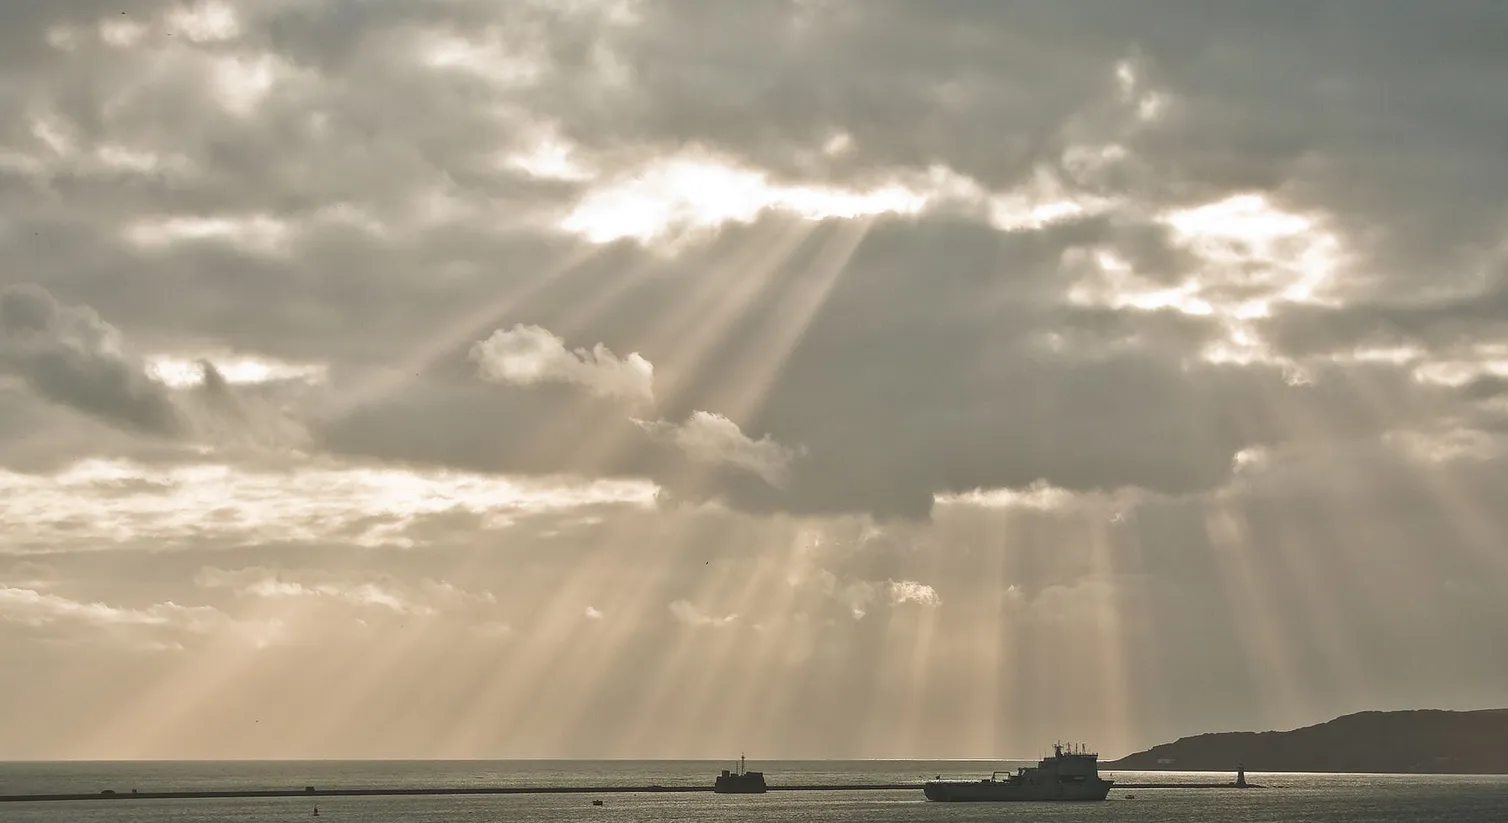 Crepuscular rays produced by stratocumulus